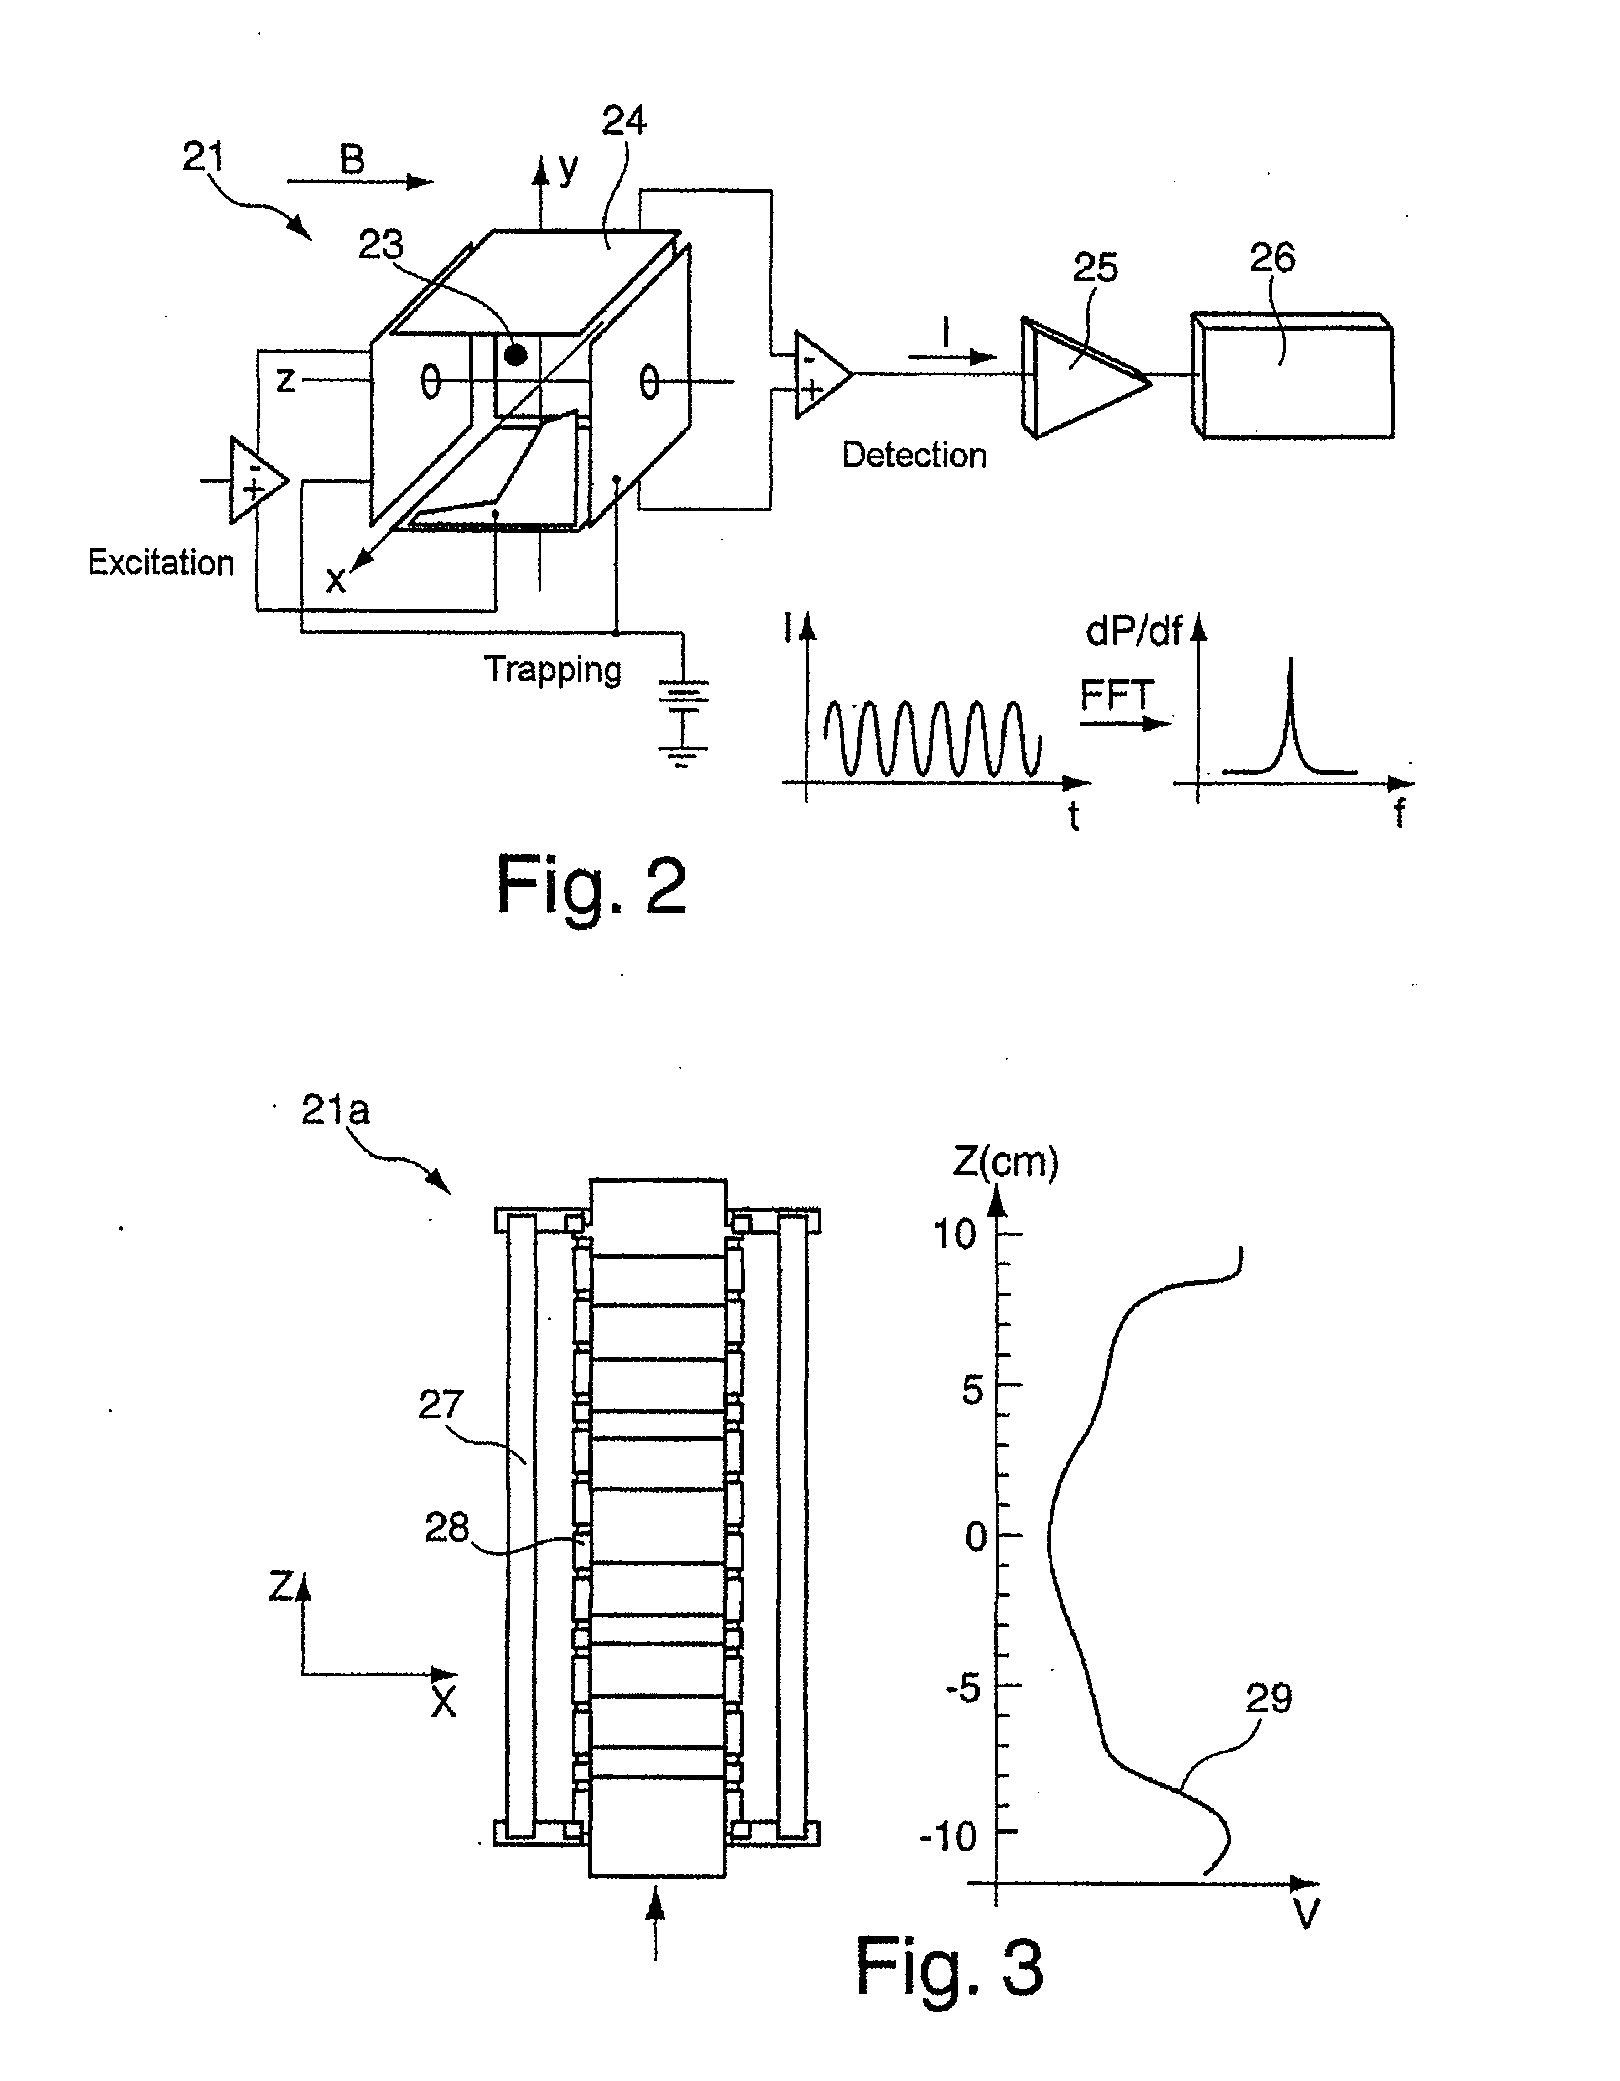 Detection of contaminating substances in an EUV lithography apparatus